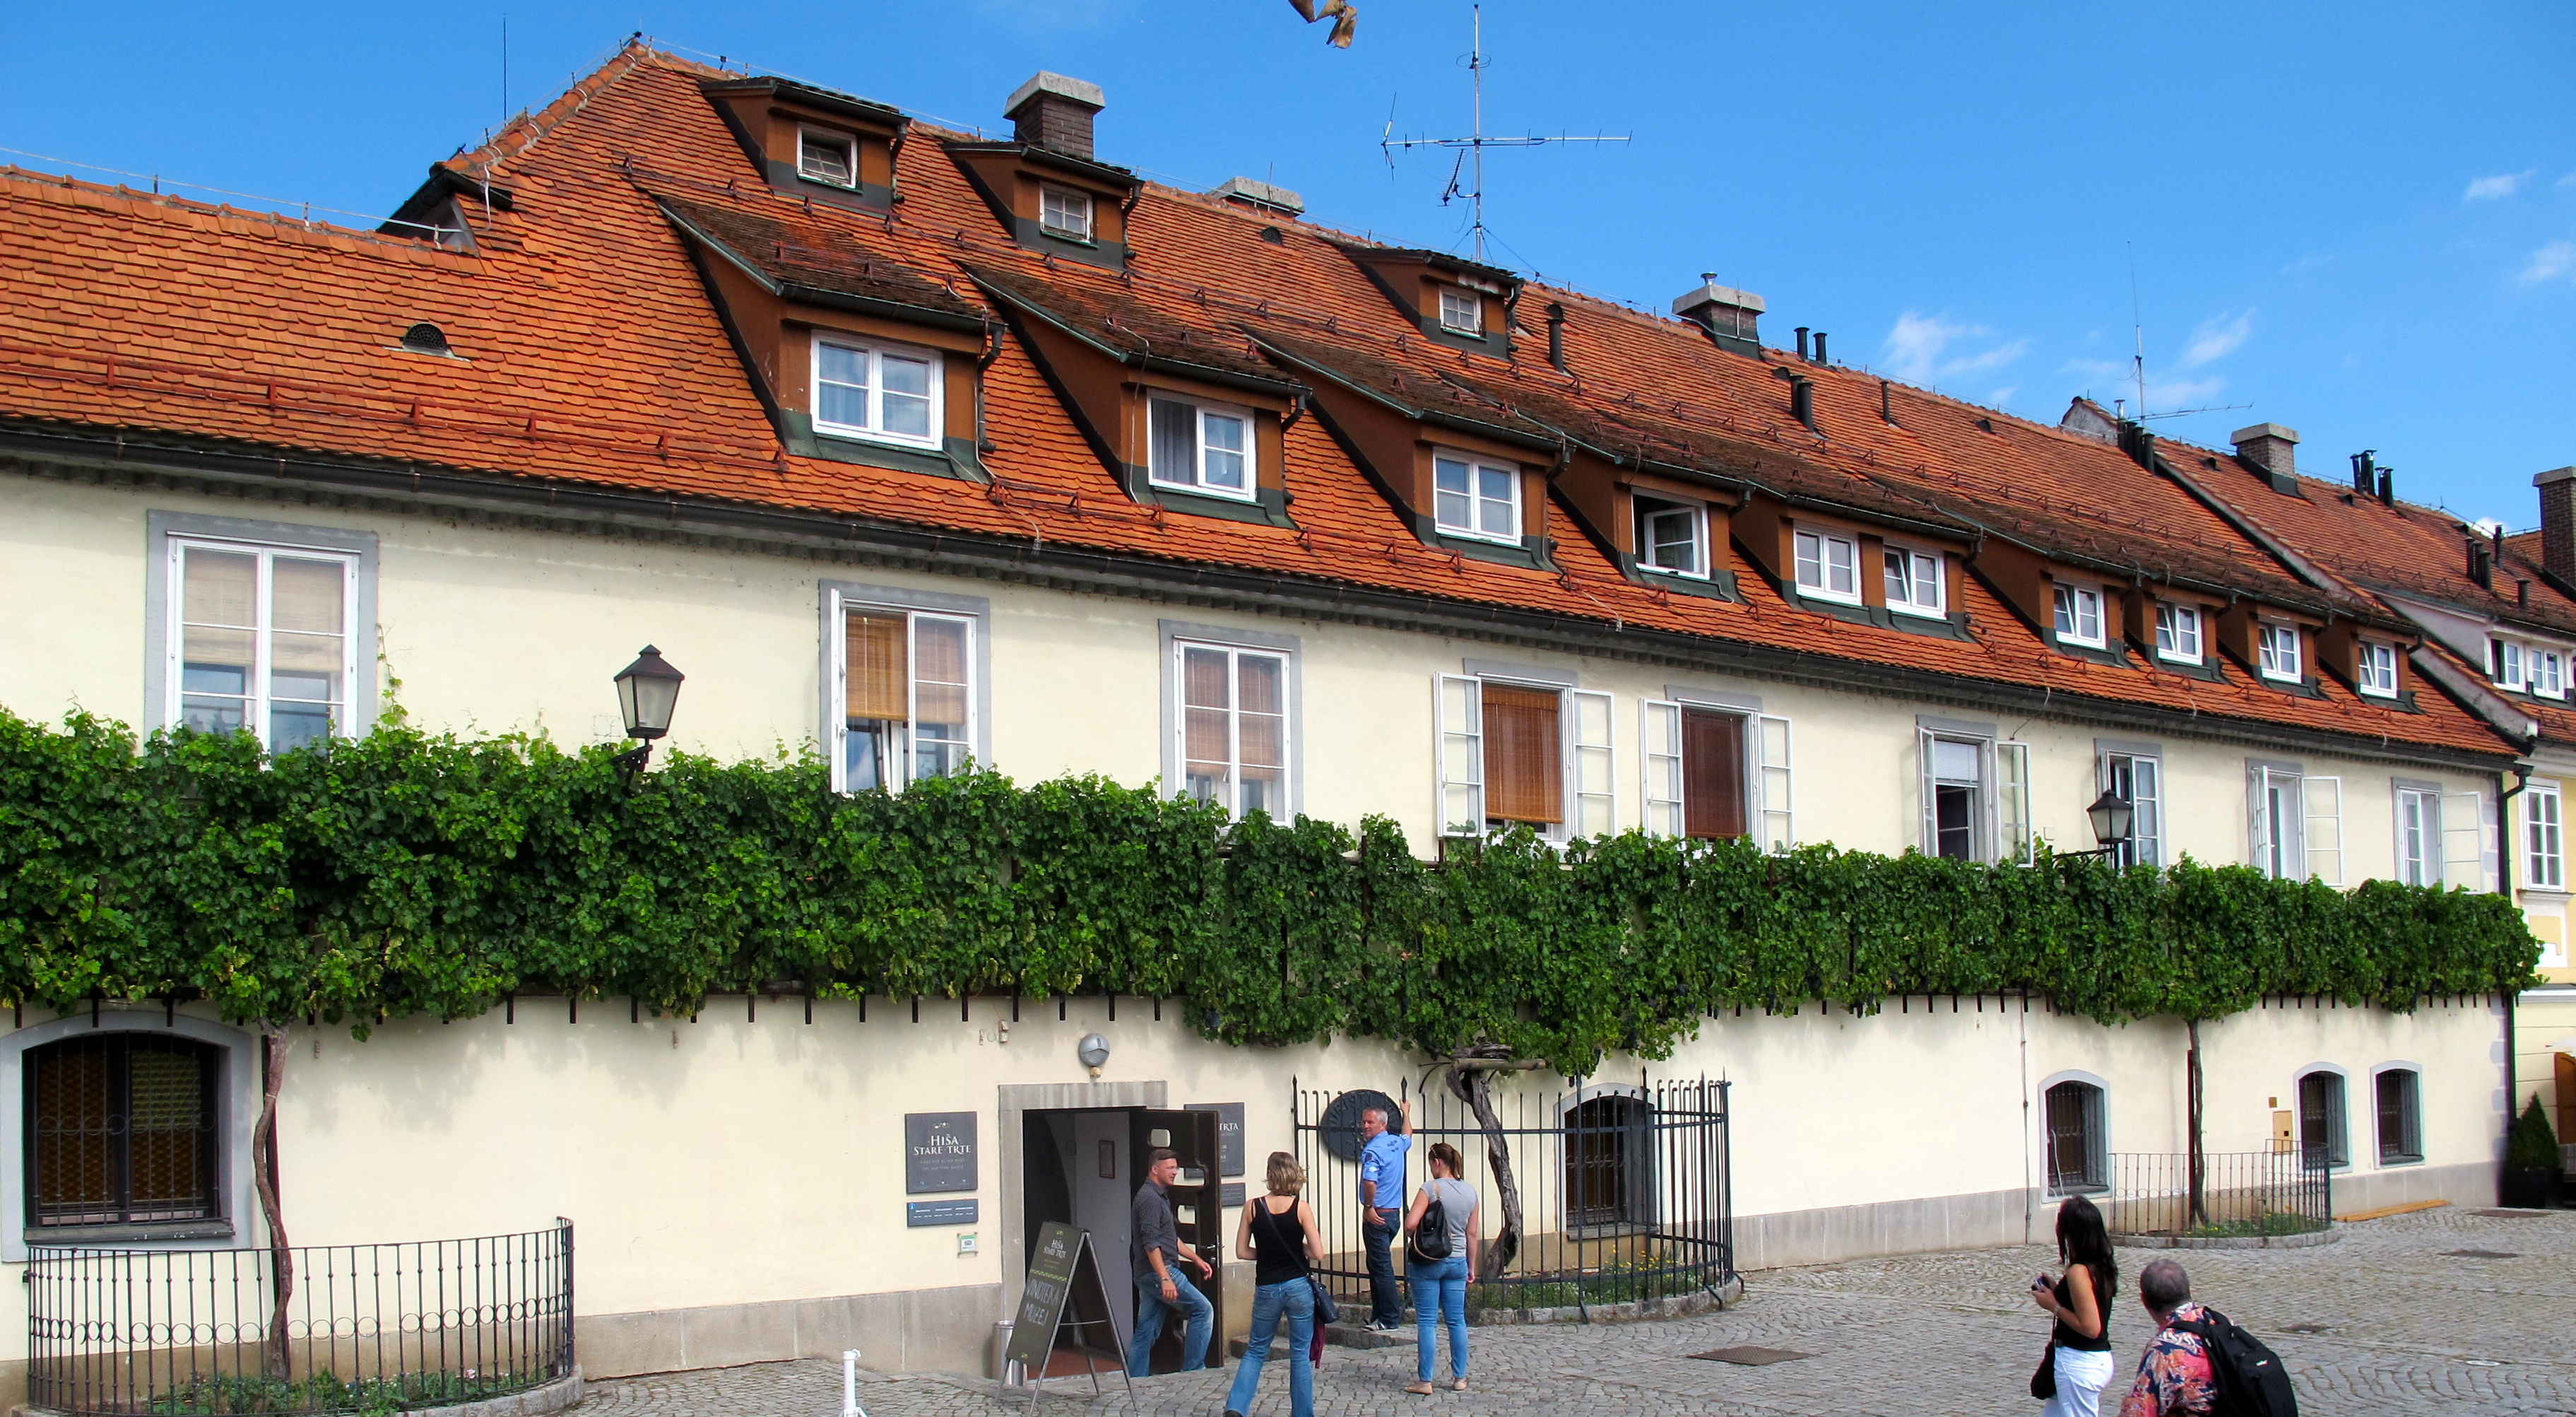 The Old Vine House is home to the world's oldest vine - and also provides information for the more than 28,000 wineries in Slovenia.